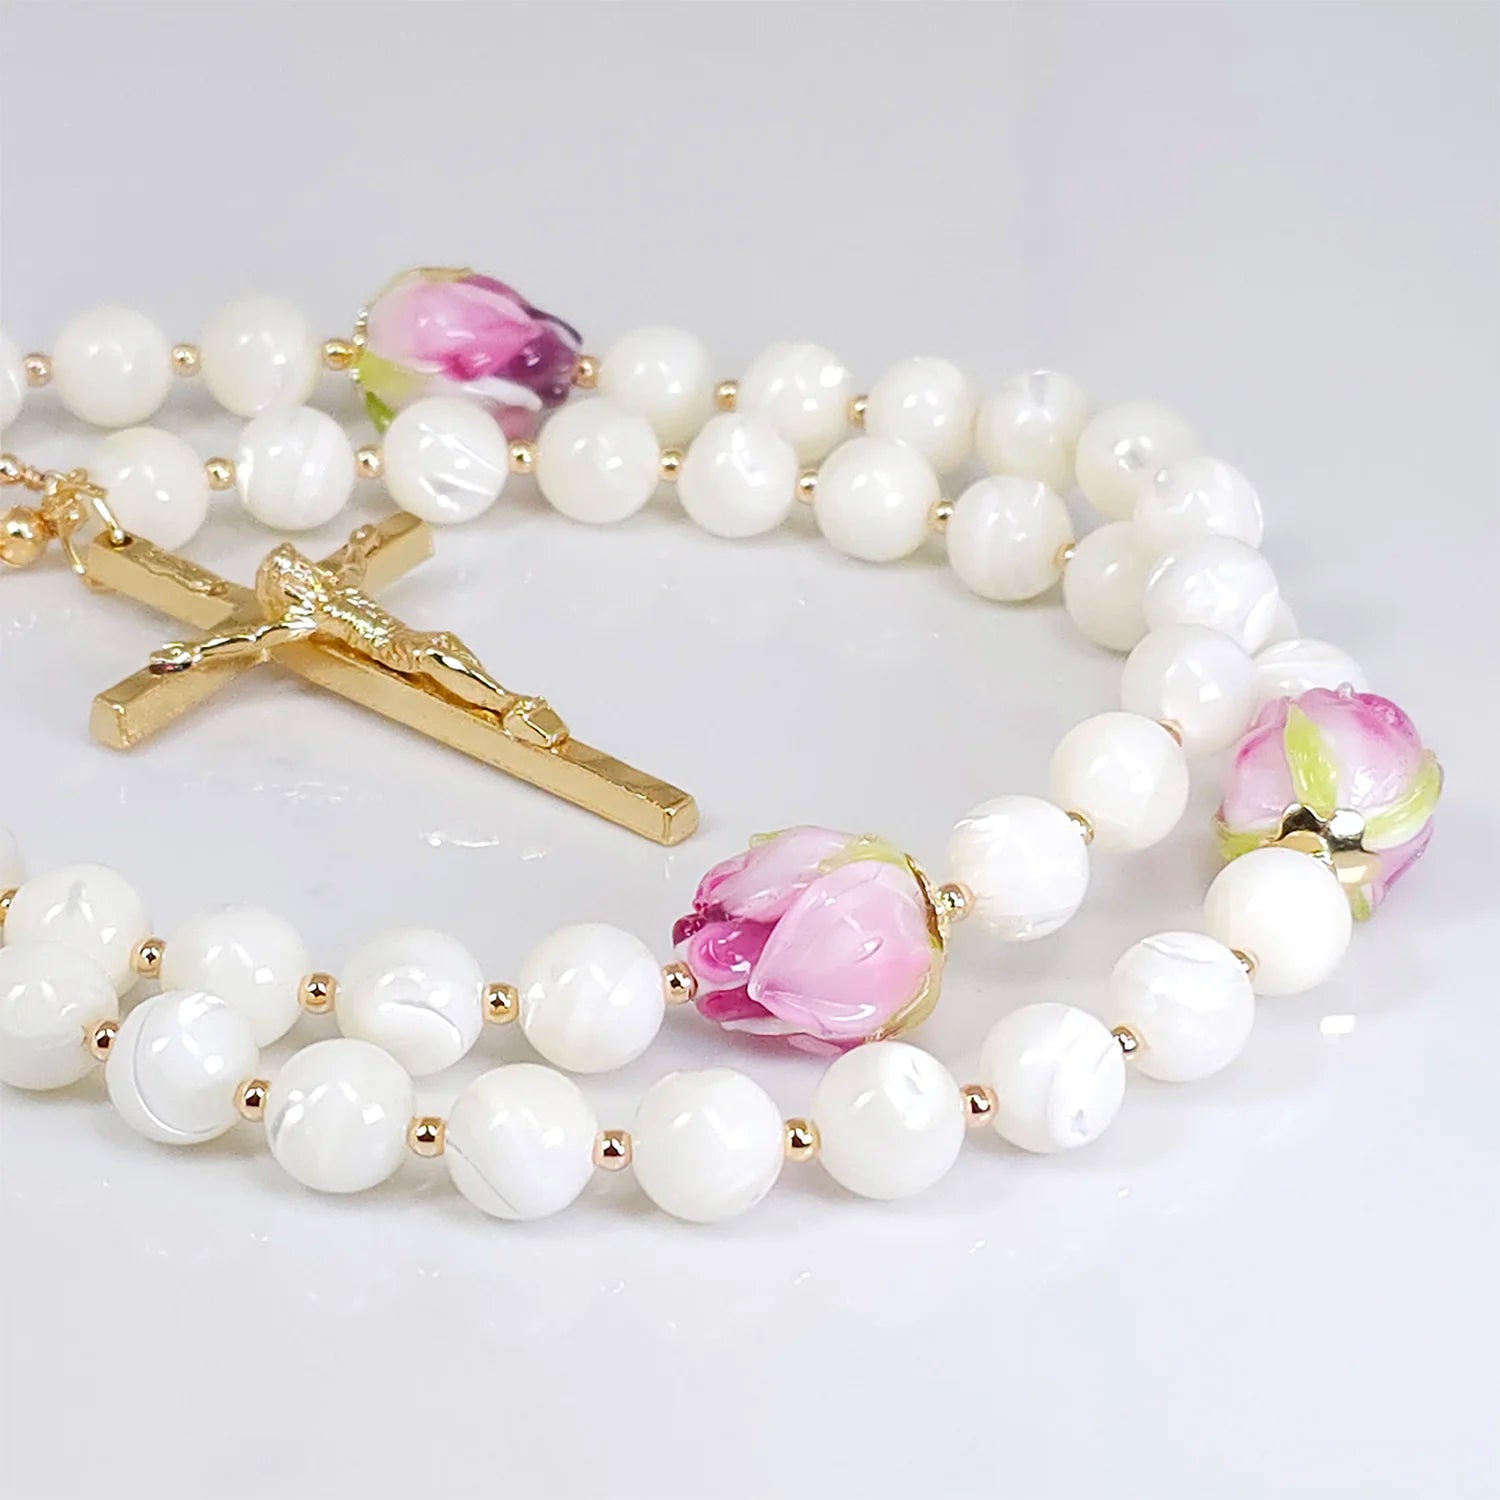 Elegant rosary highlighting Mother of Pearl beads, complemented by pink rosebud flower glass beads.